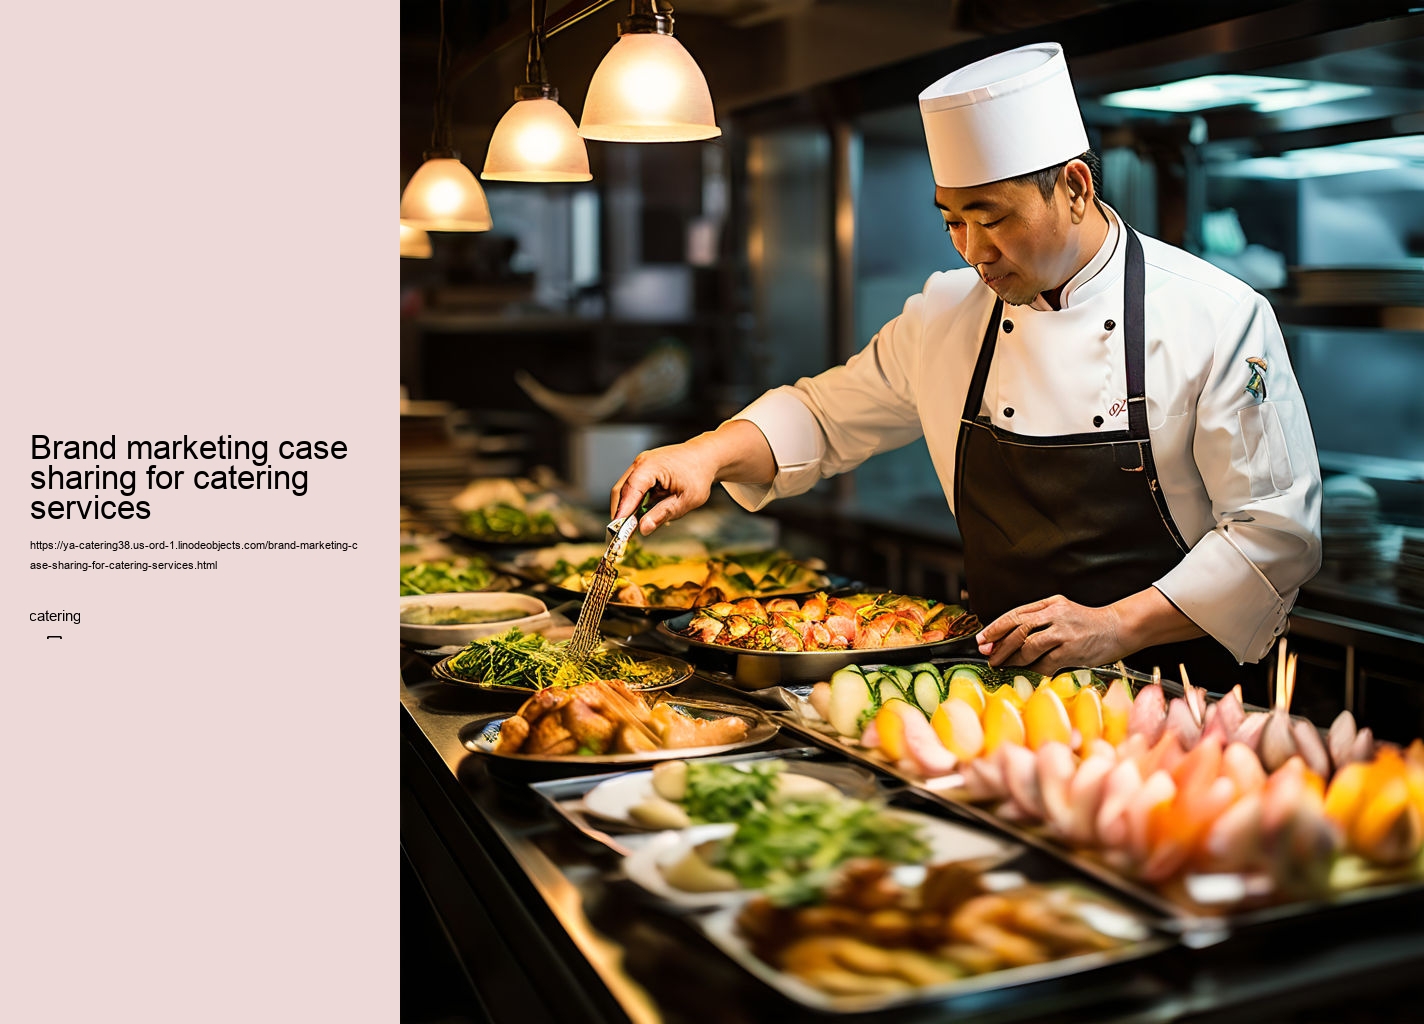 Brand marketing case sharing for catering services